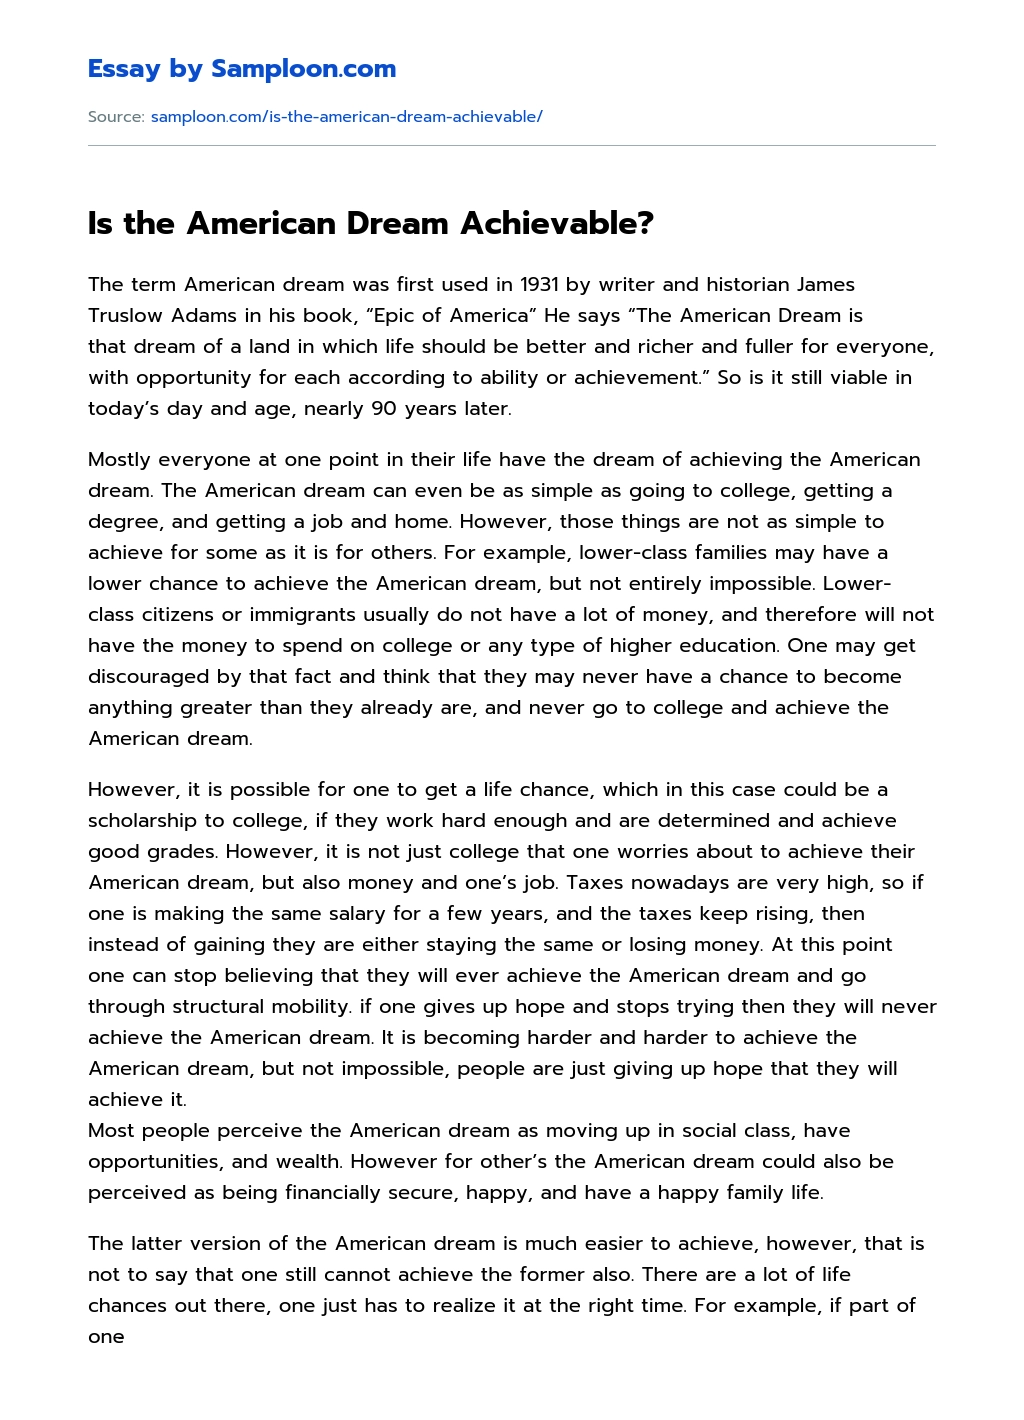 Is the American Dream Achievable? essay